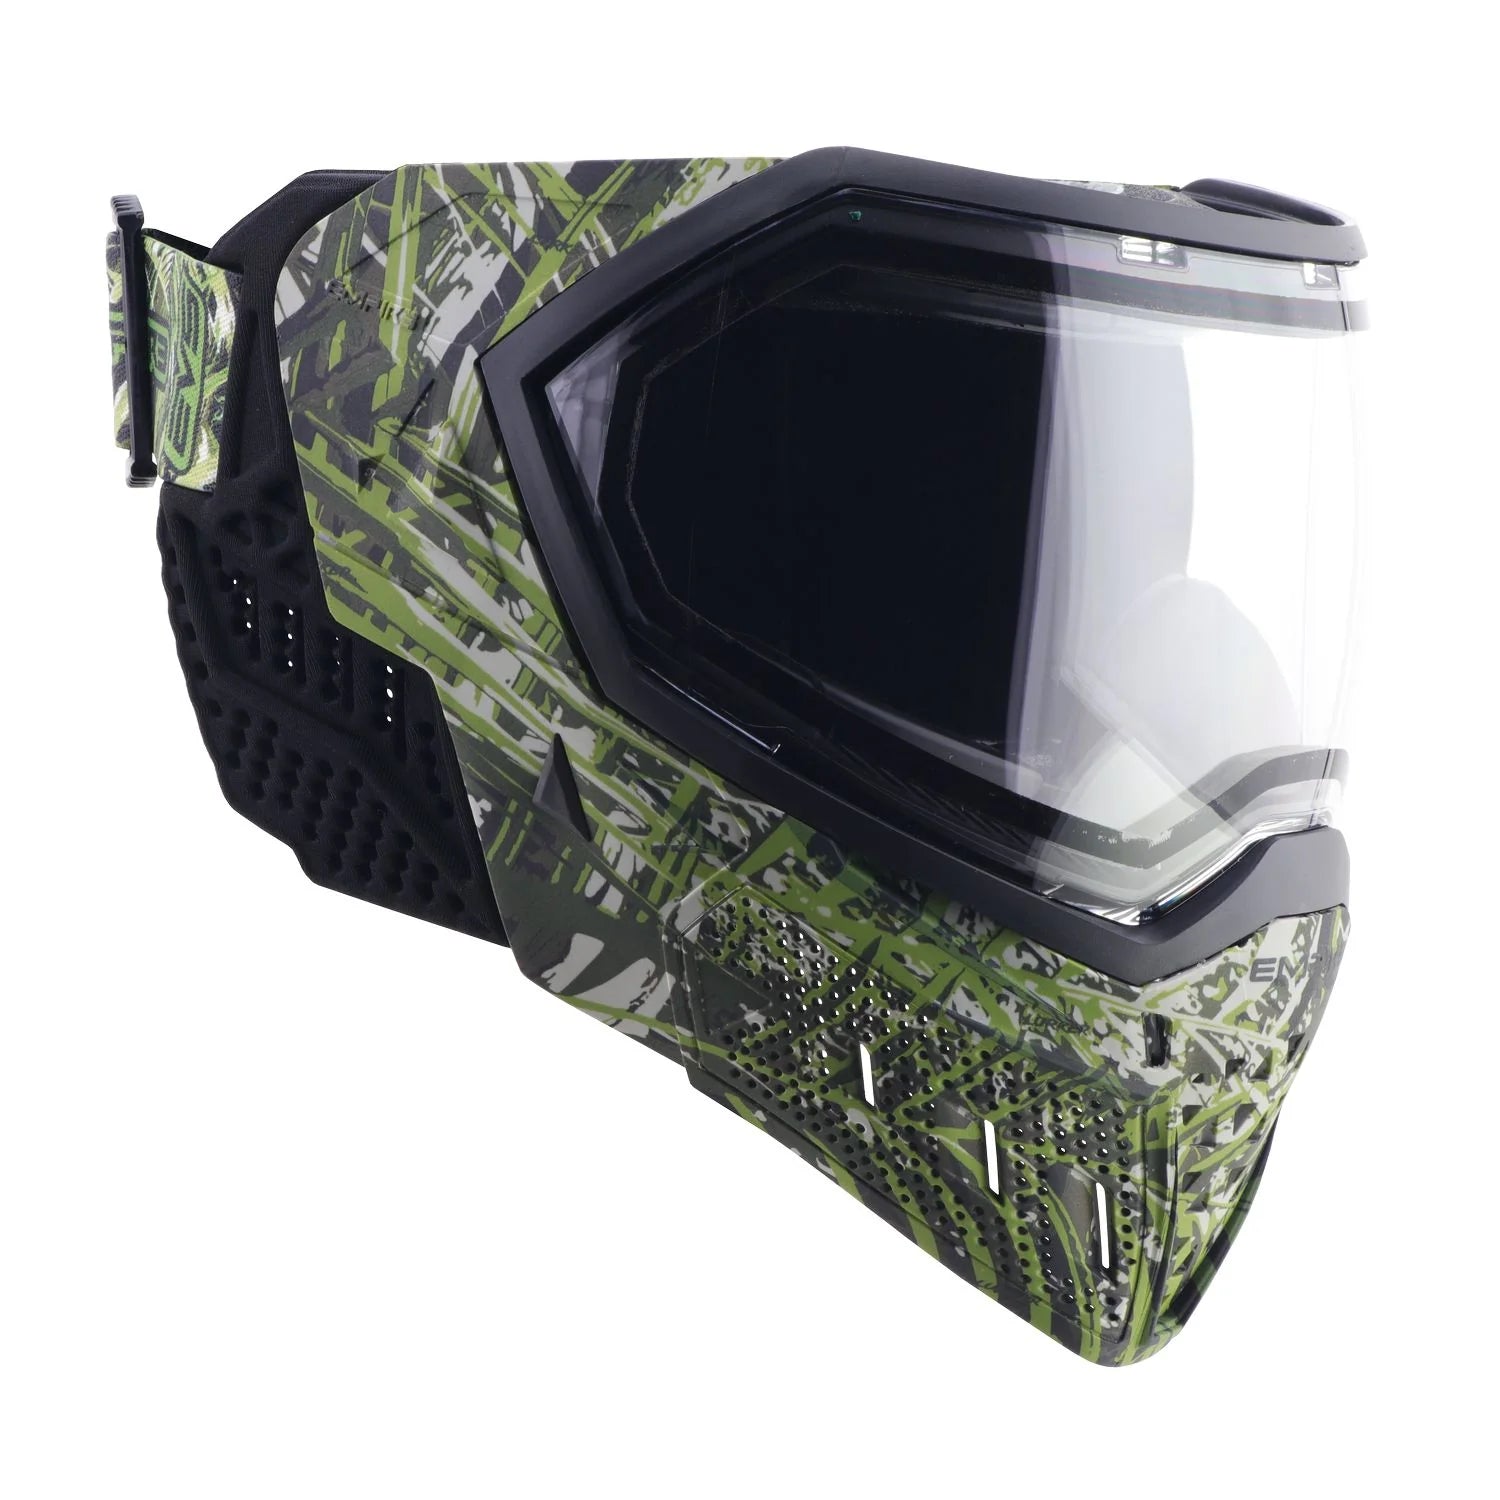 Empire EVS Lurker LE with Thermal Ninja & Thermal Clear Lenses | Shop Airsoft Goggle